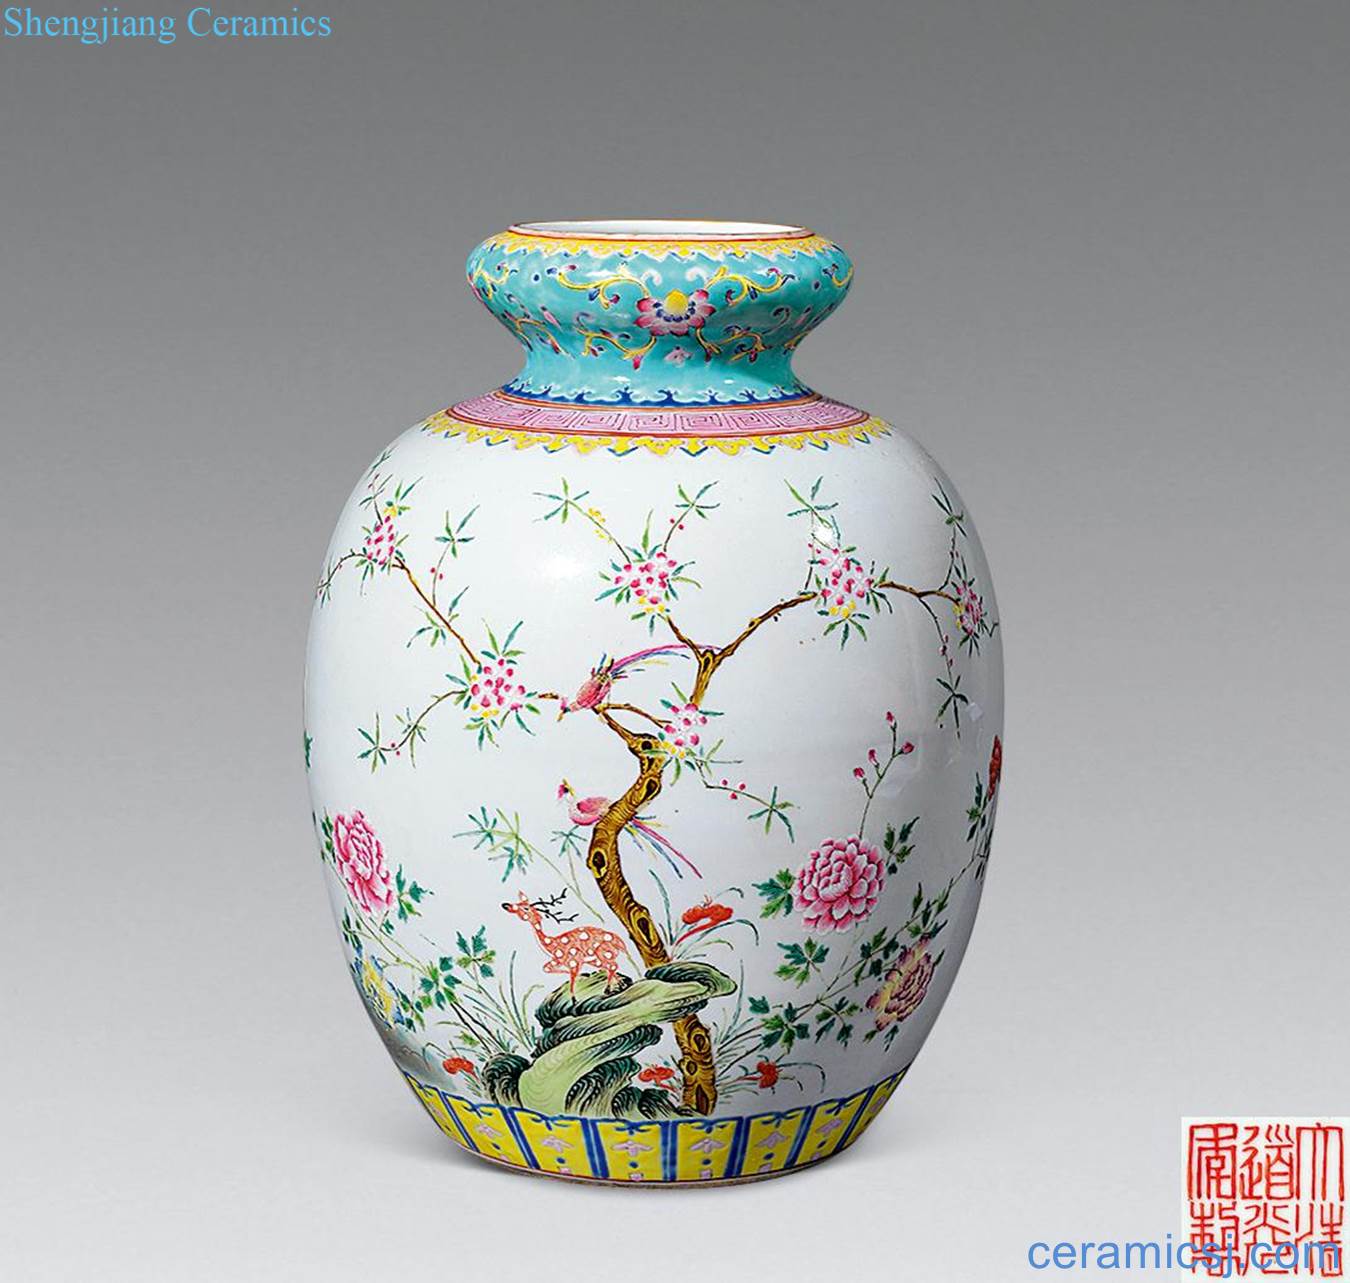 Pastel reign of qing emperor guangxu figure statue of peony flowers and birds